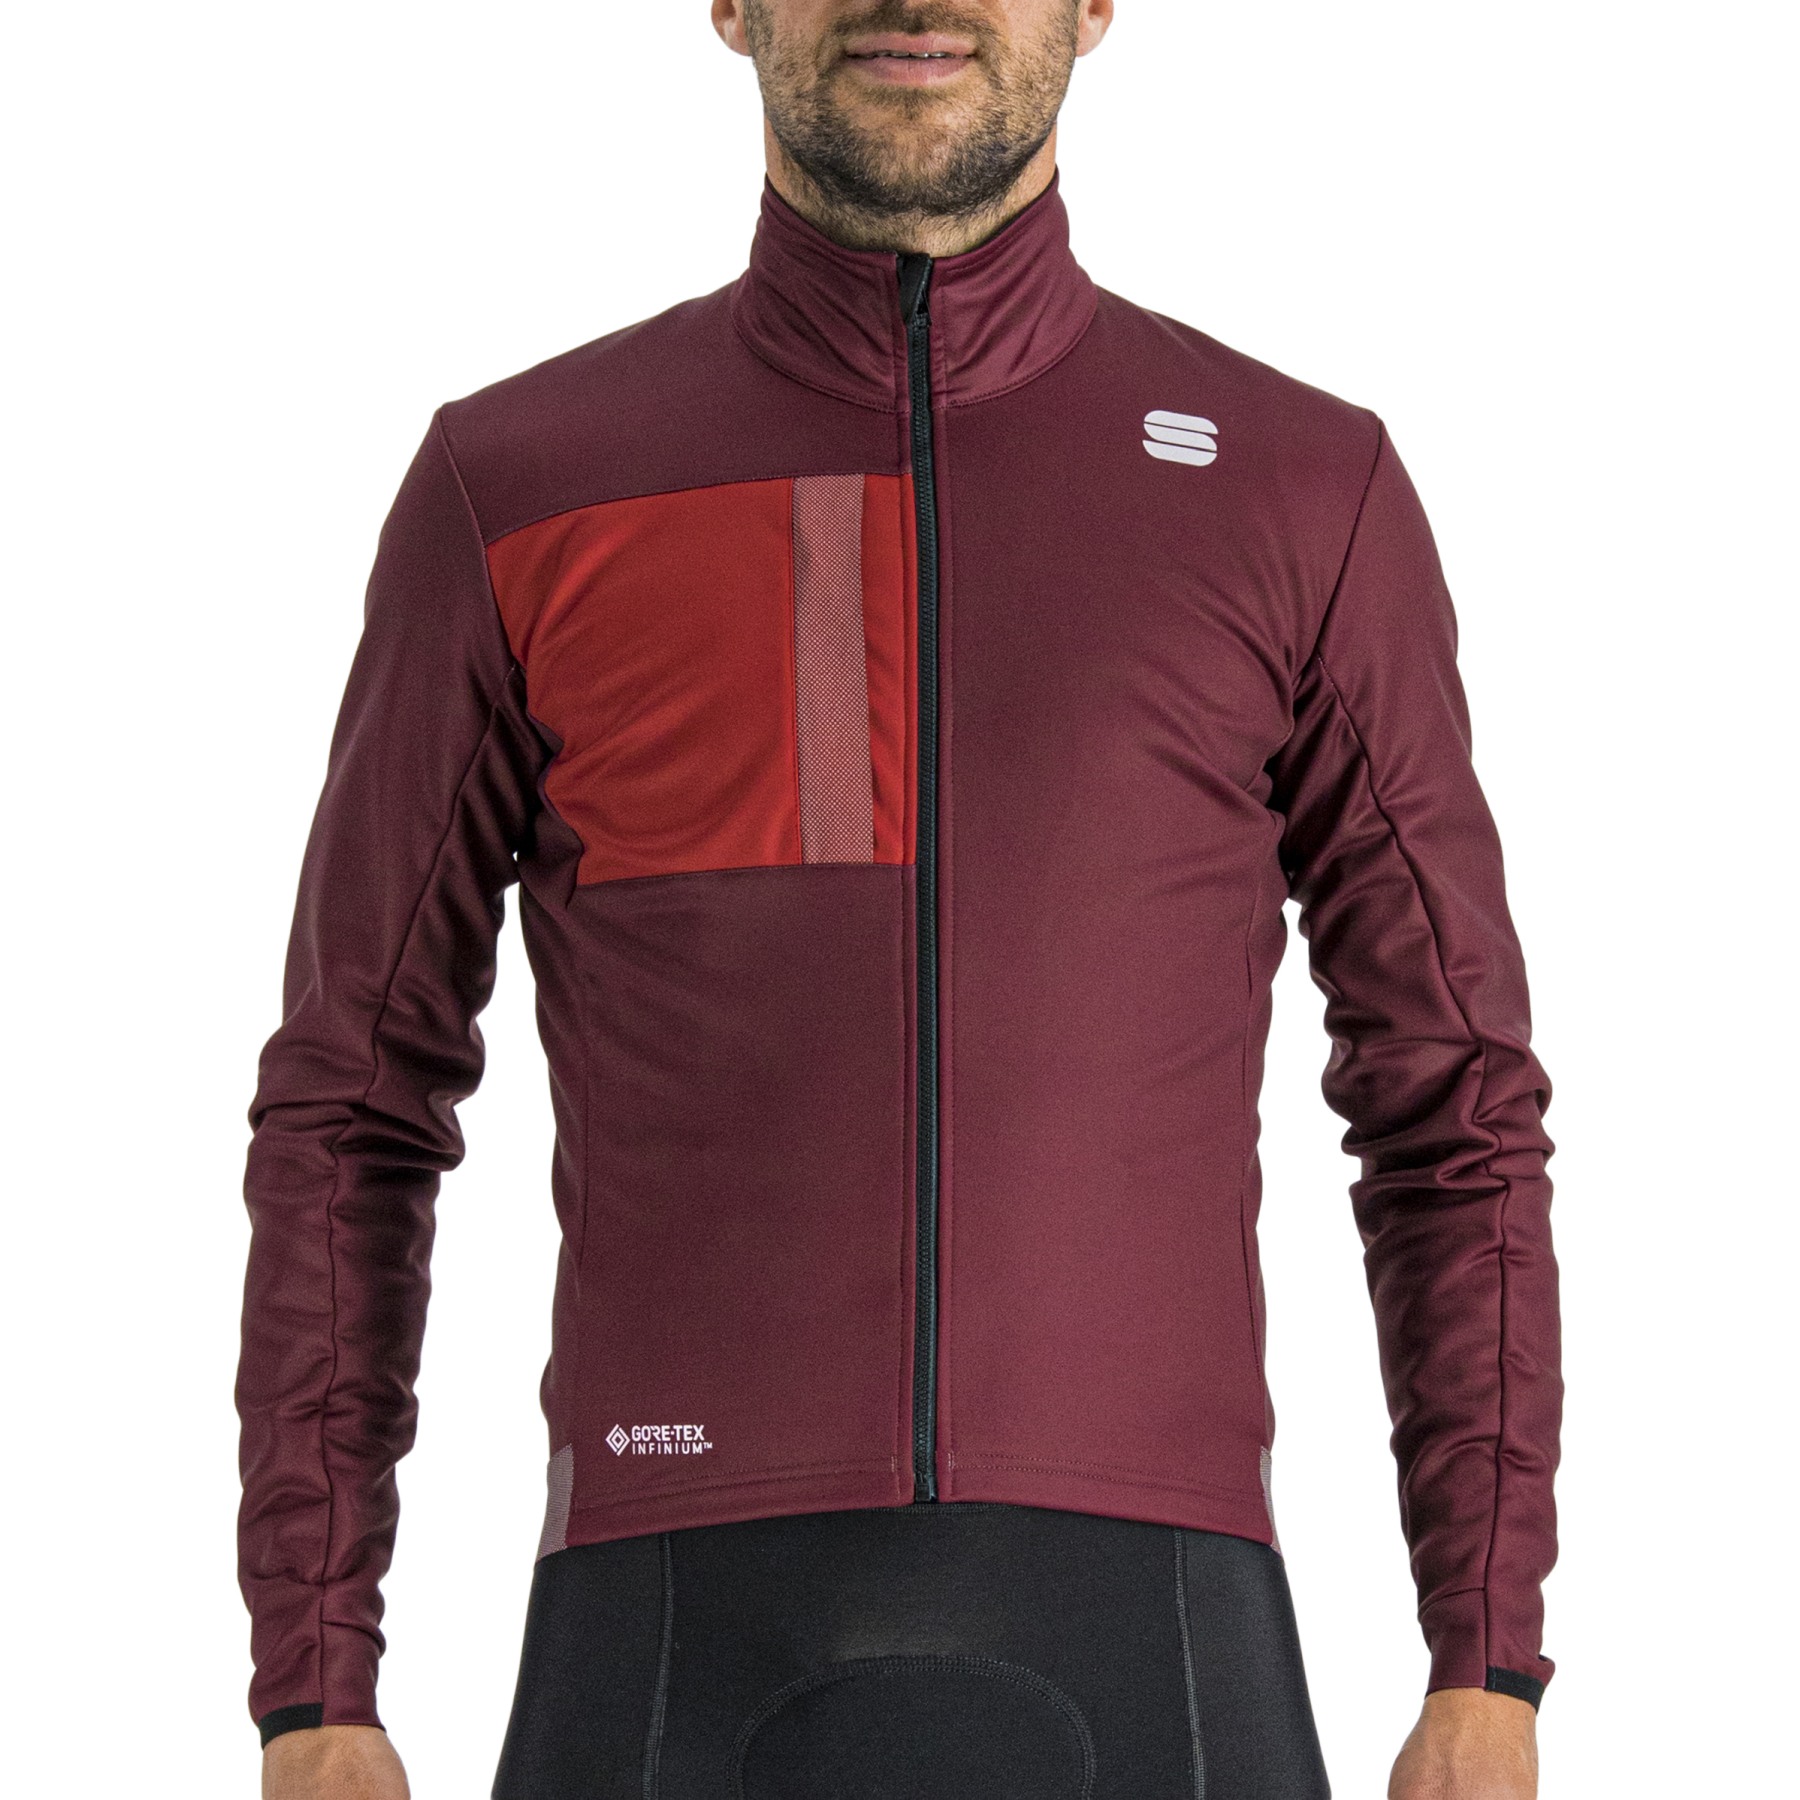 Image of Sportful Super Cycling Jacket - 605 Red Wine